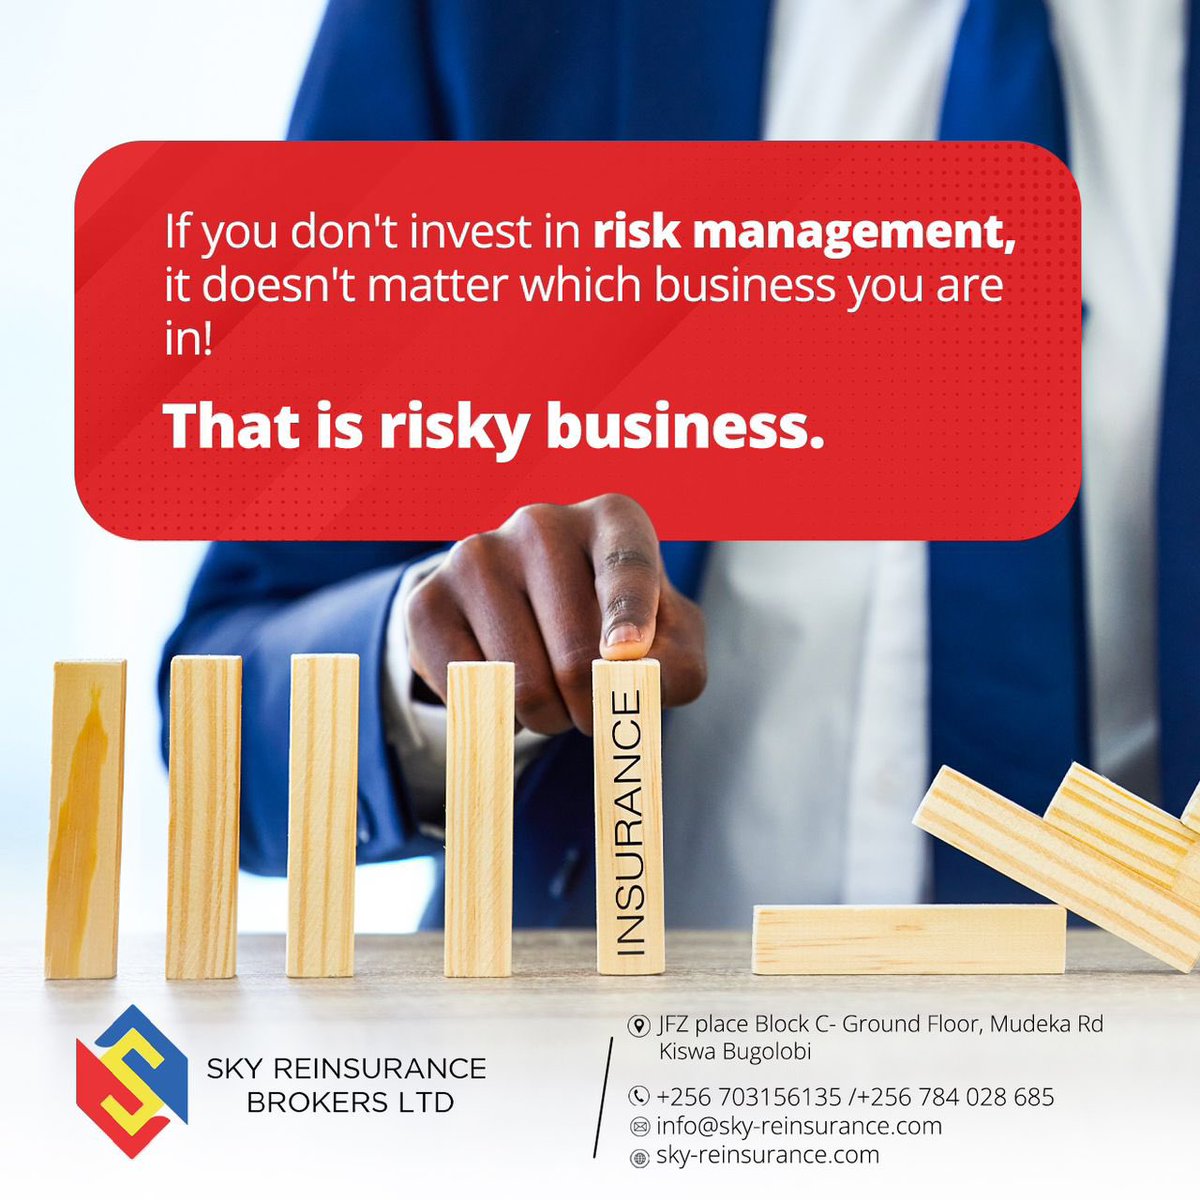 It’s risky business not to invest in risk management for your establishment! Talk to us for your customized risk management needs 👌🏽 #RiskManagement